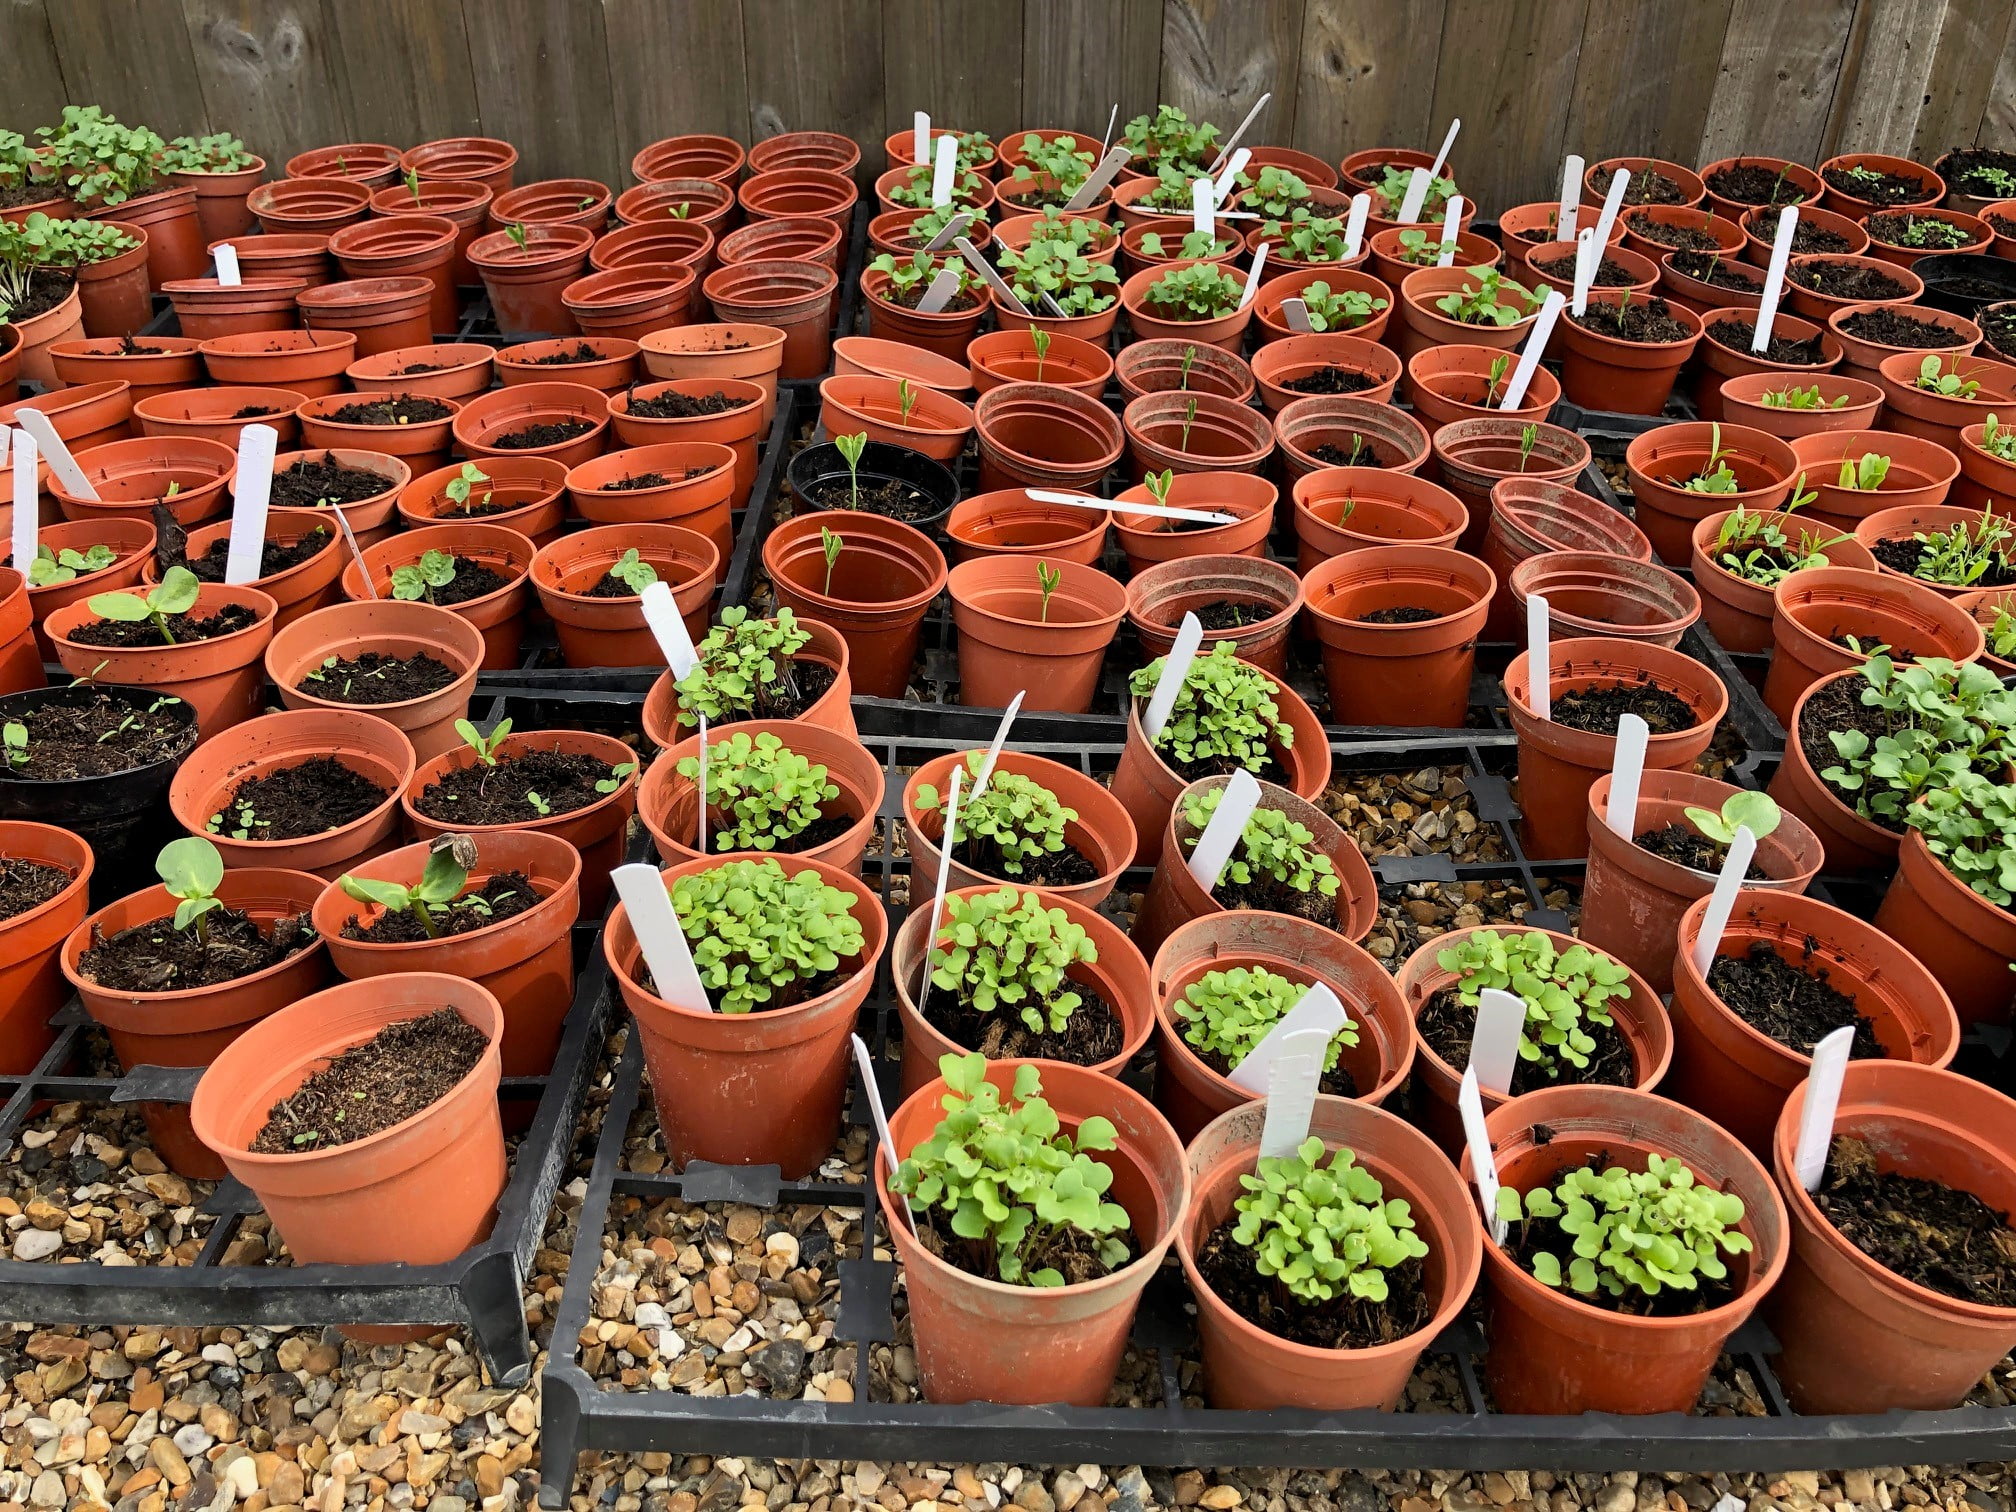 seedlings from the green fingers project